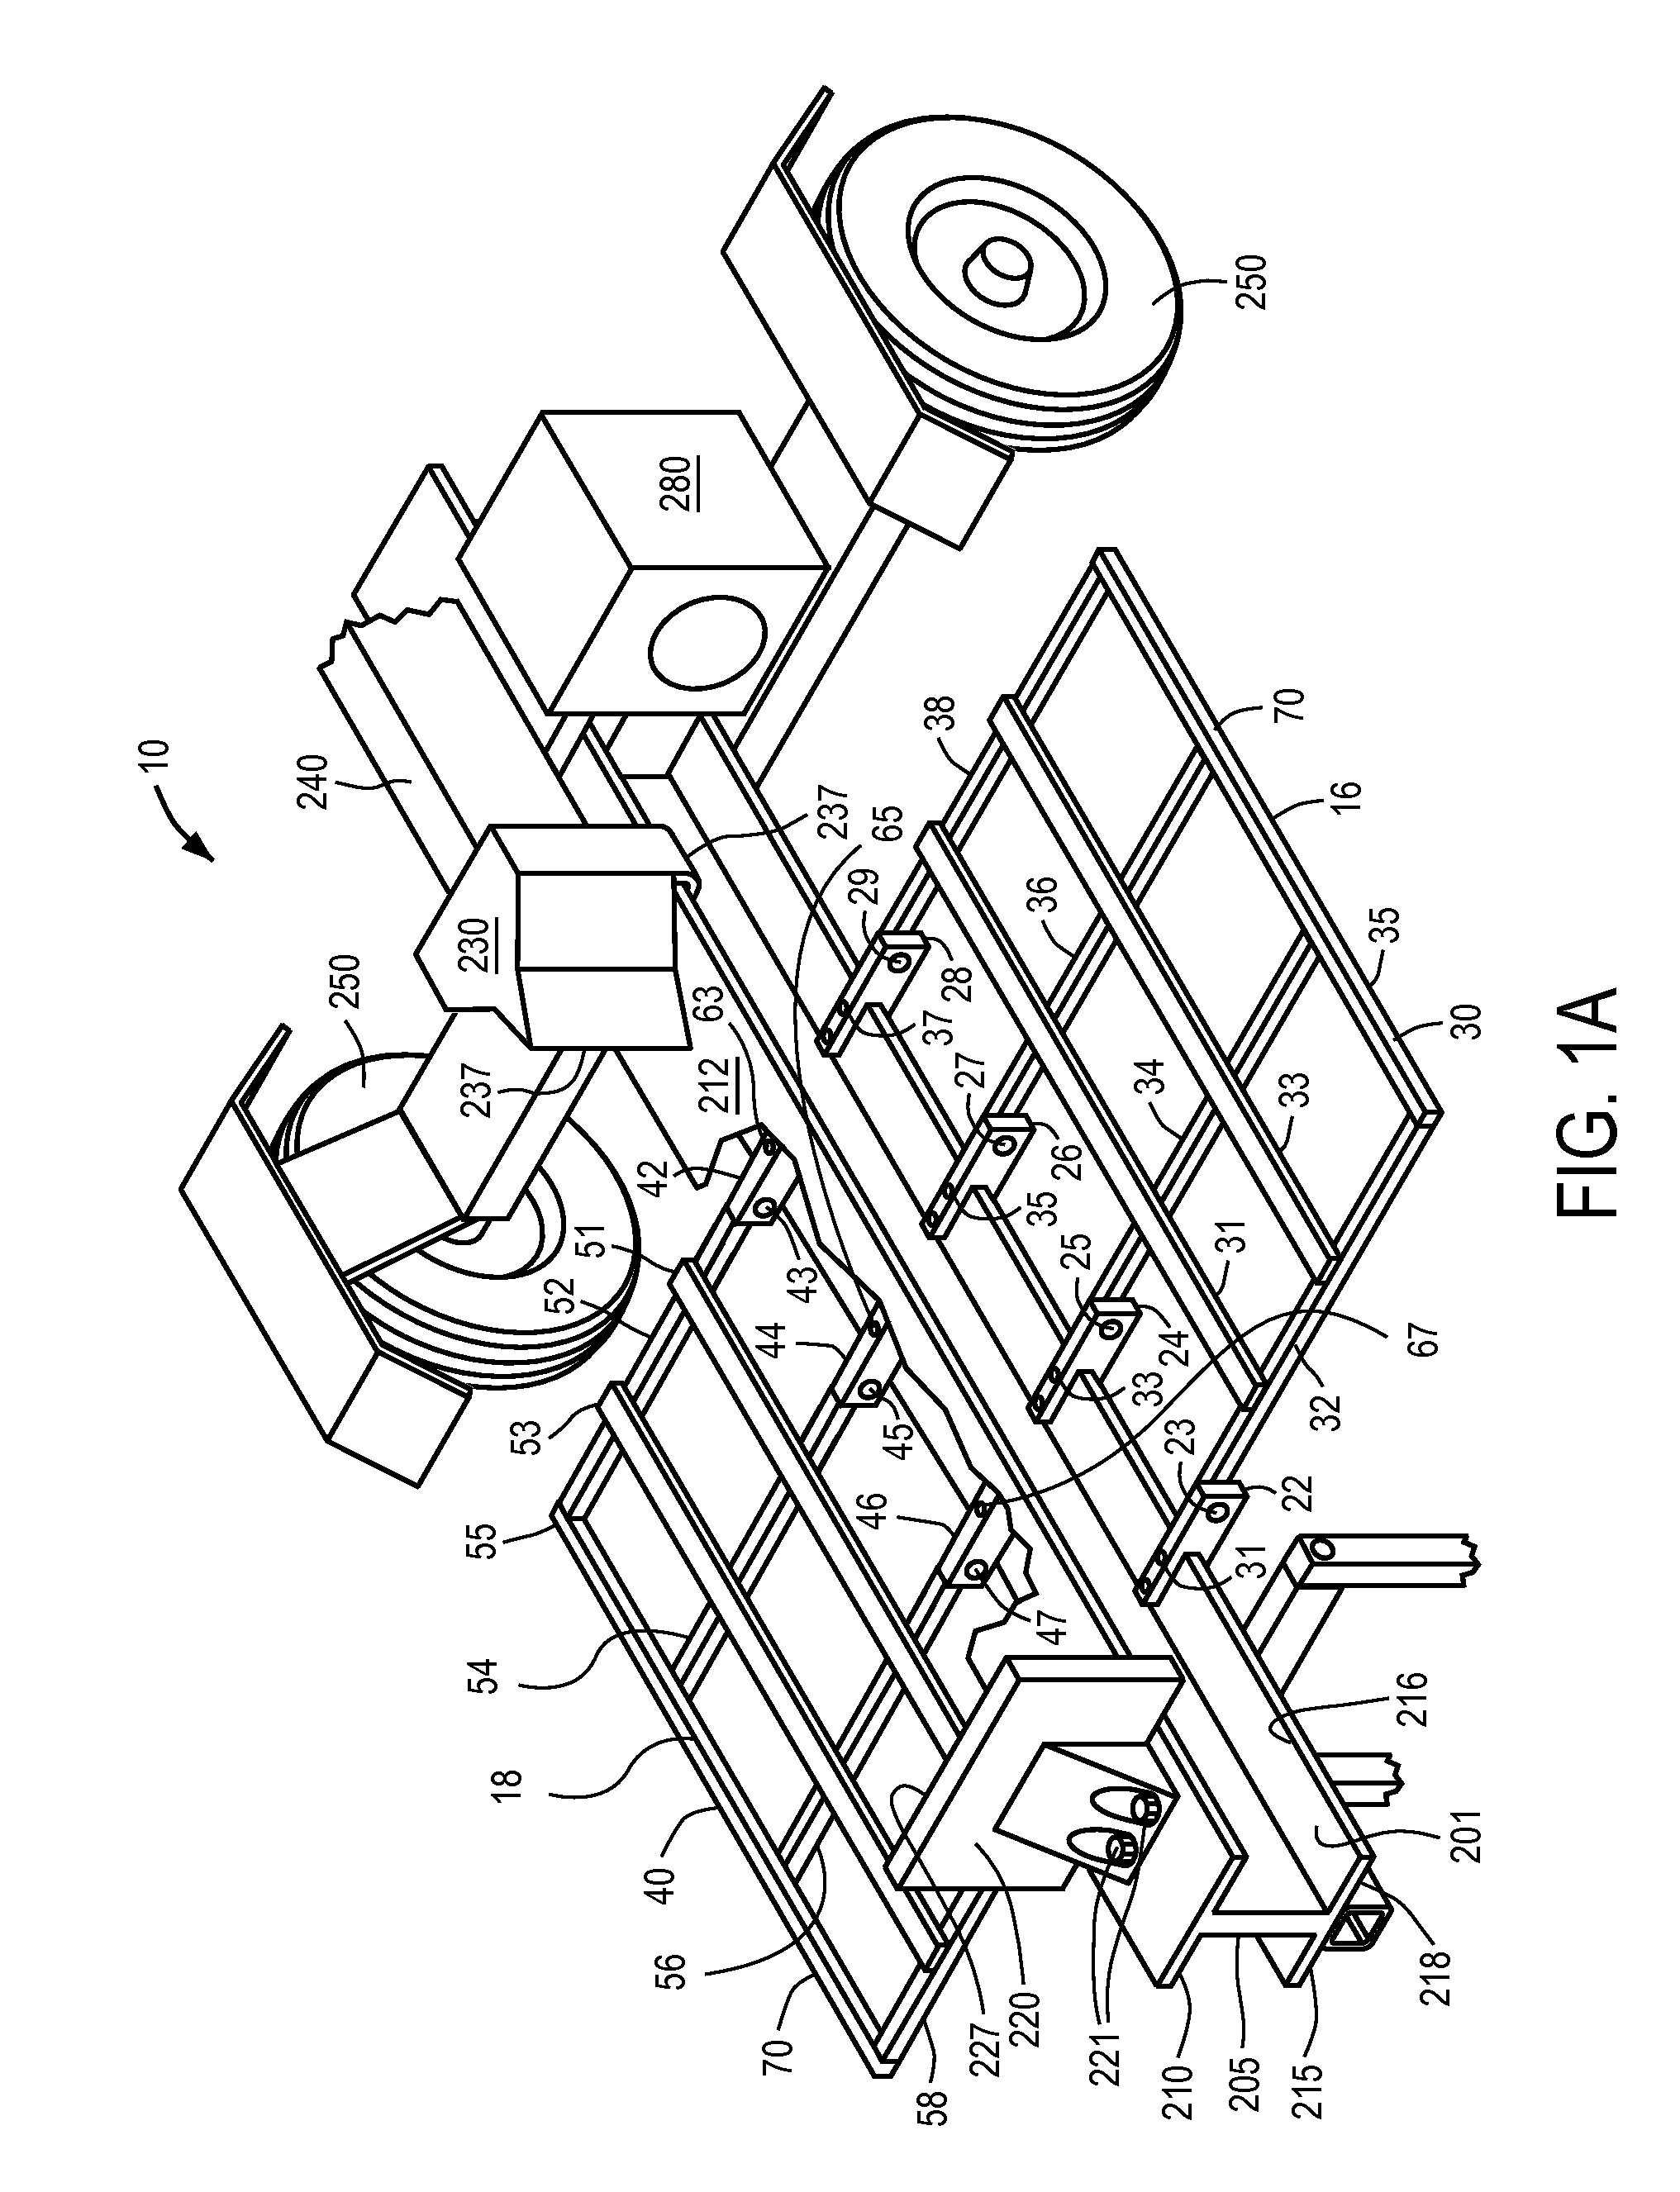 Log splitter apparatus and related methods